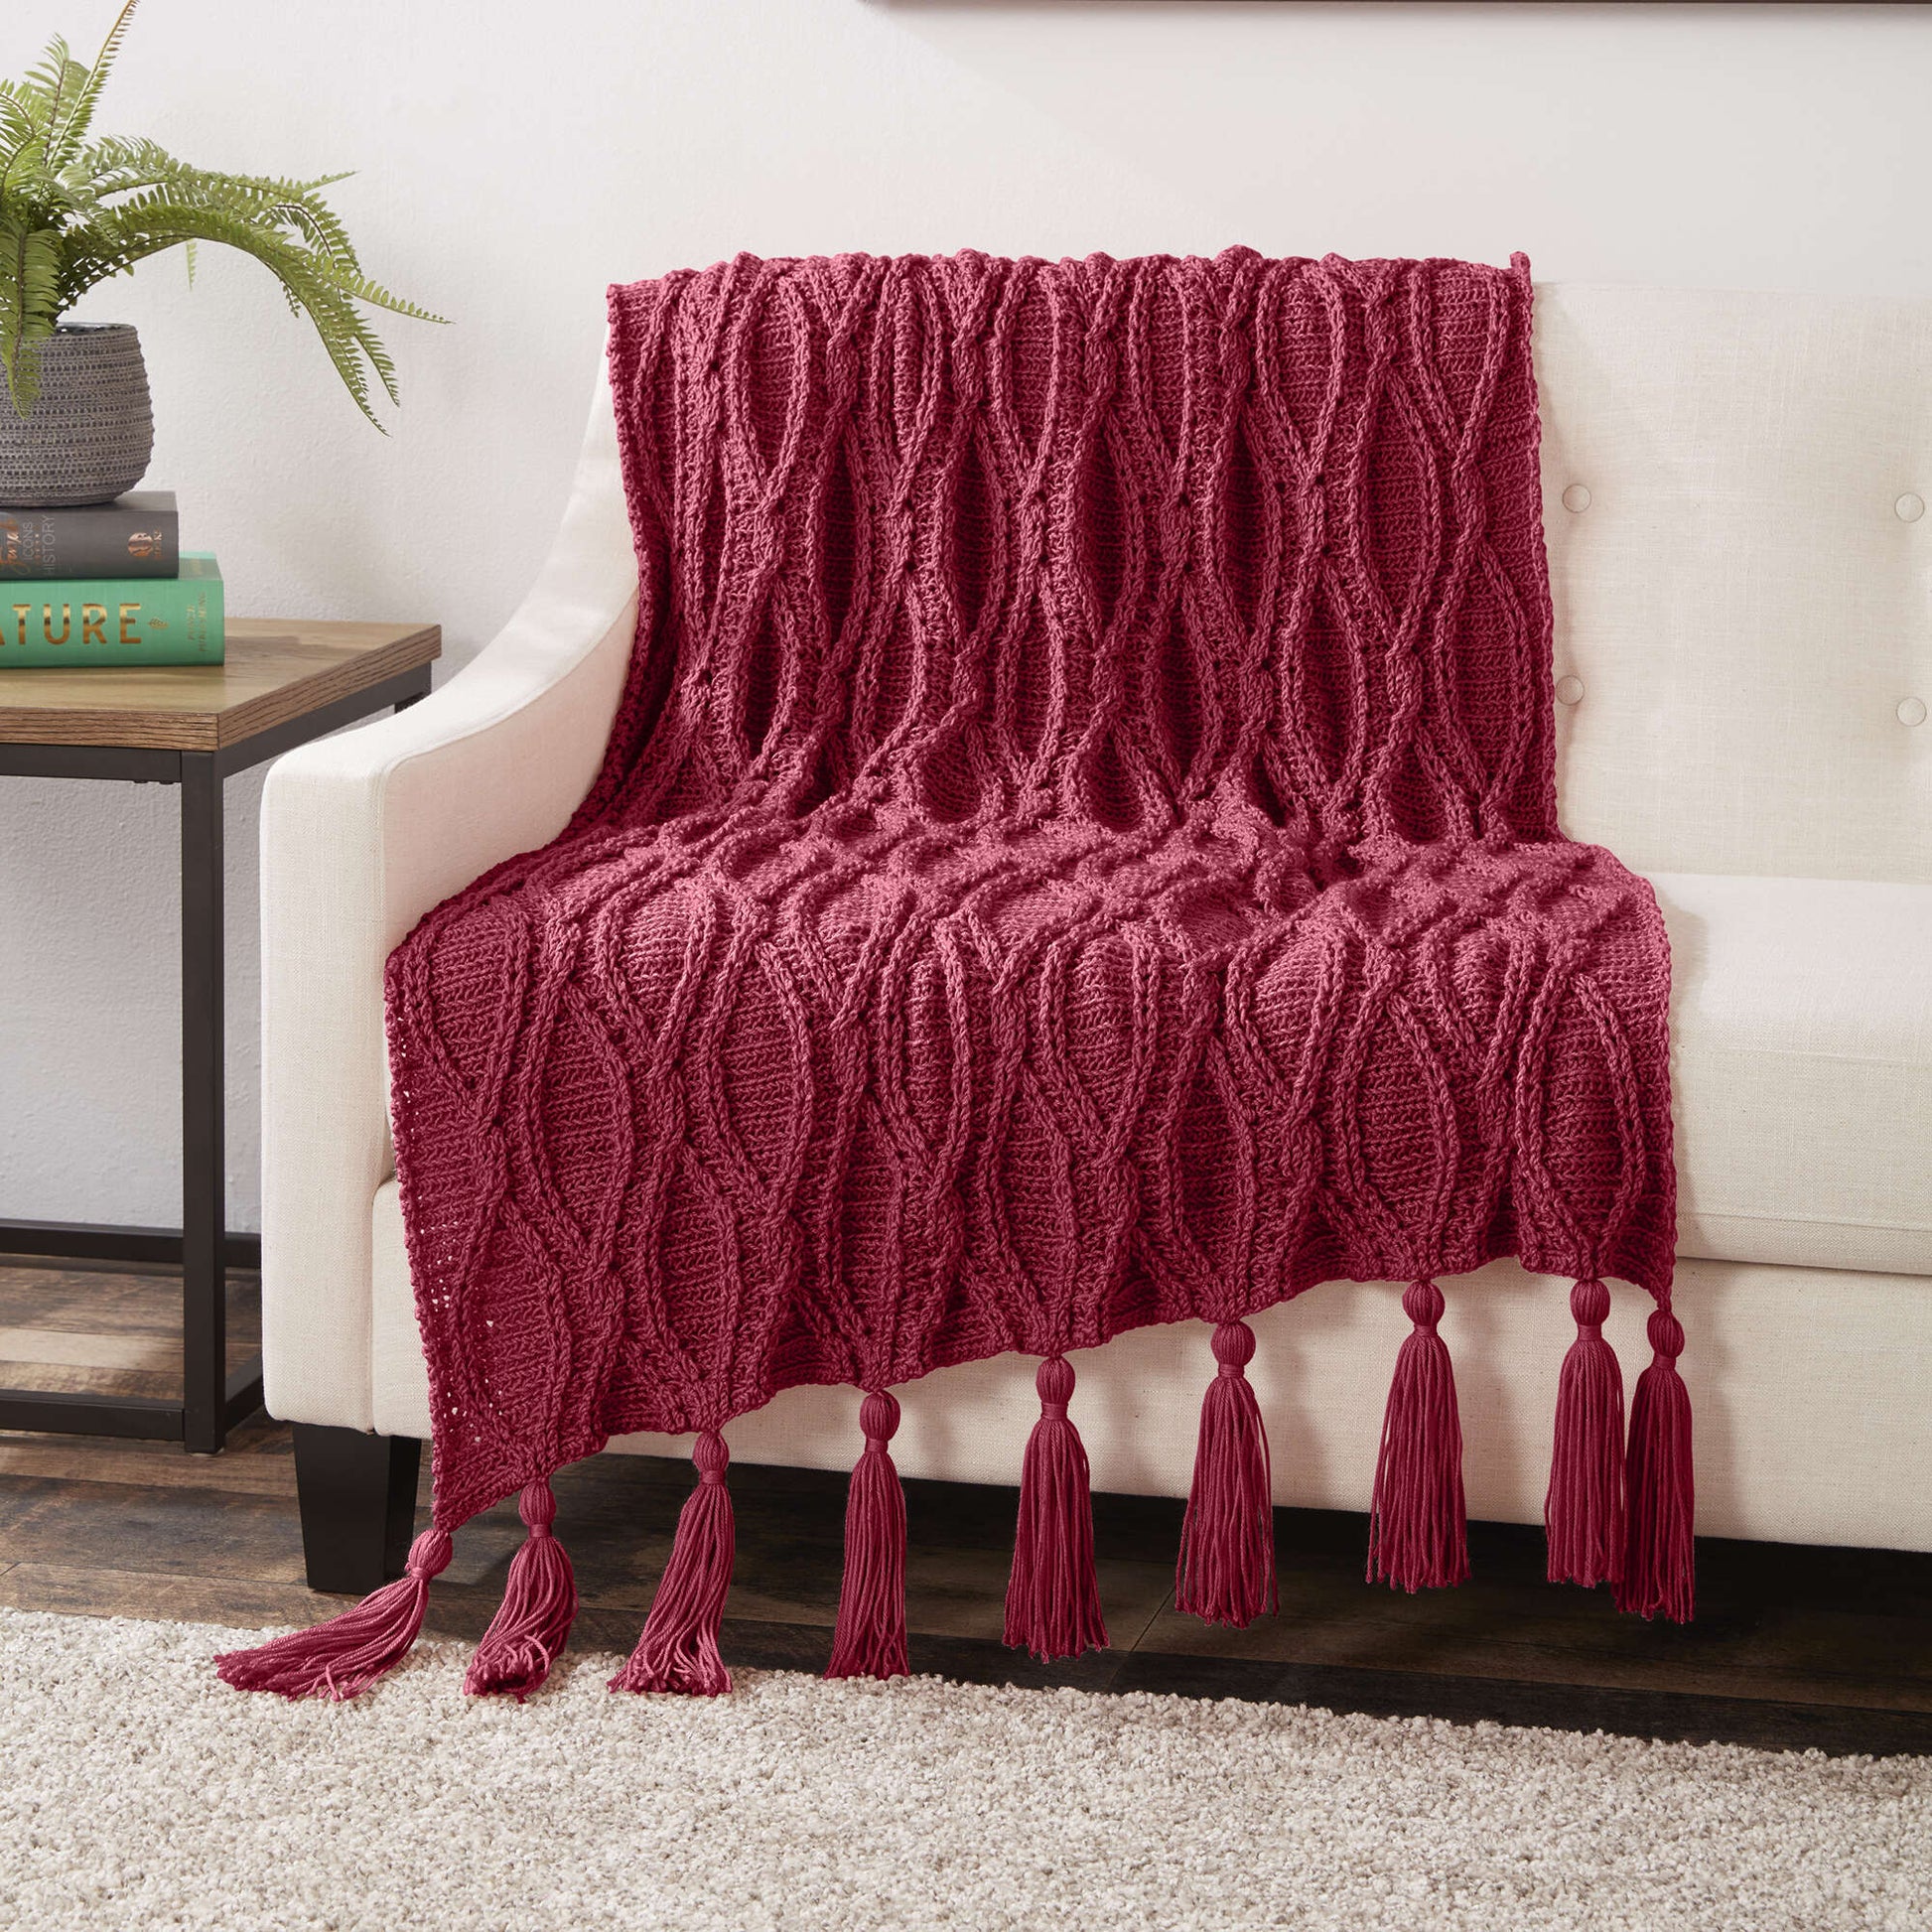 Free Caron Crochet Cables Blanket Pattern